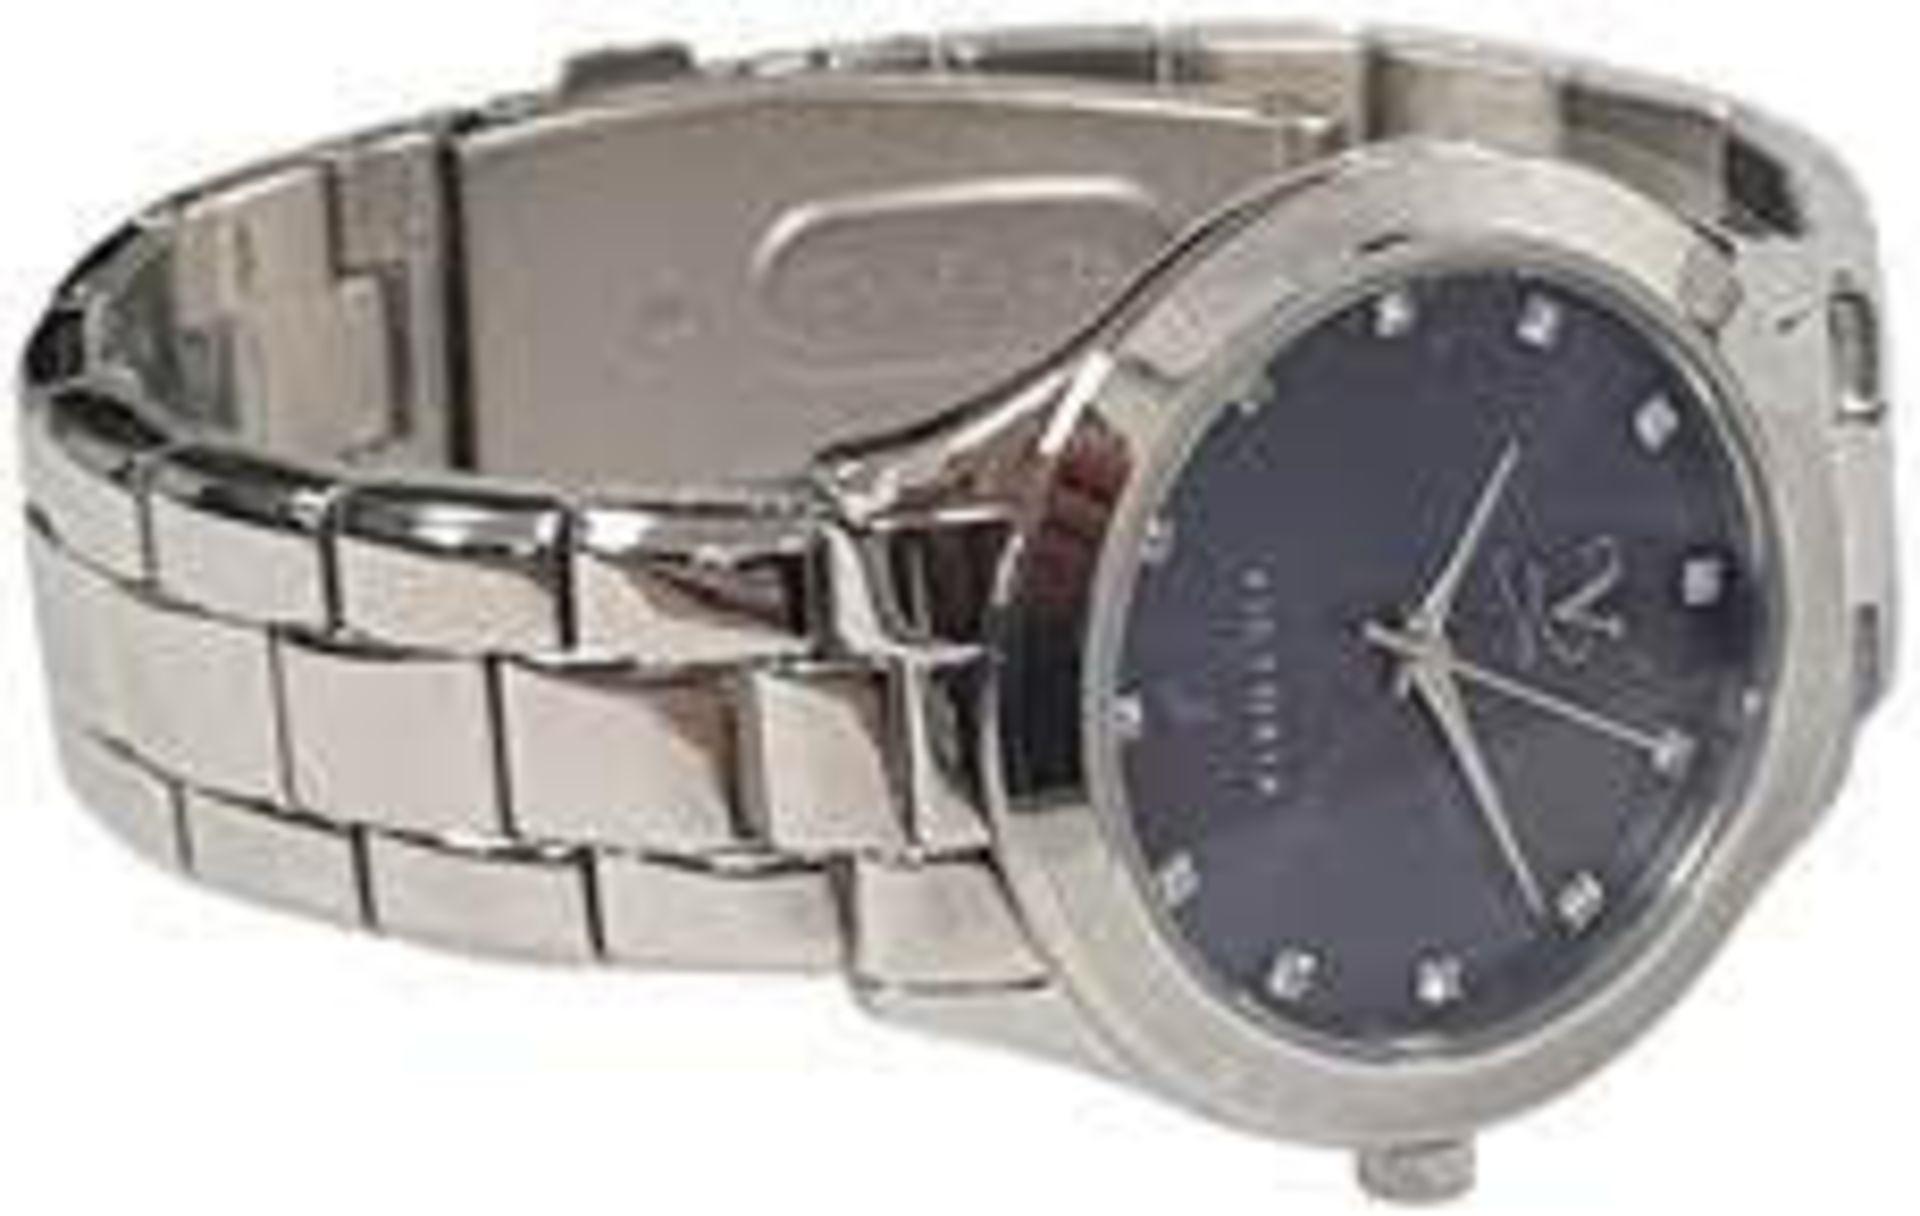 V Brand New Ladies Victoria Stainless Steel Watch With Bracelet Strap - Navy Face - Silver Hands - - Image 3 of 3